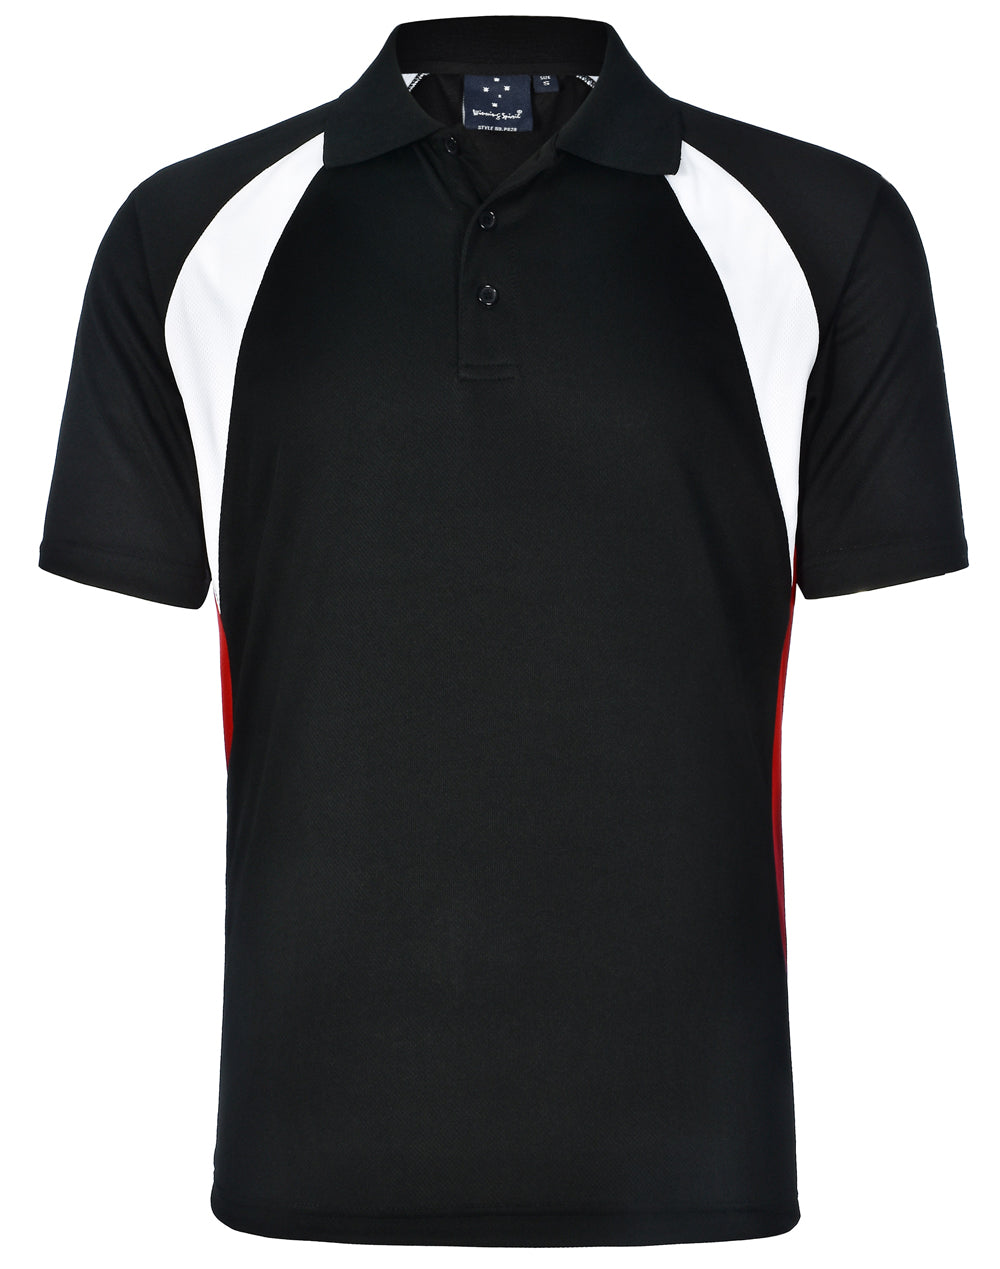 Cooldry Tricolour Polo Shirt - made by AIW